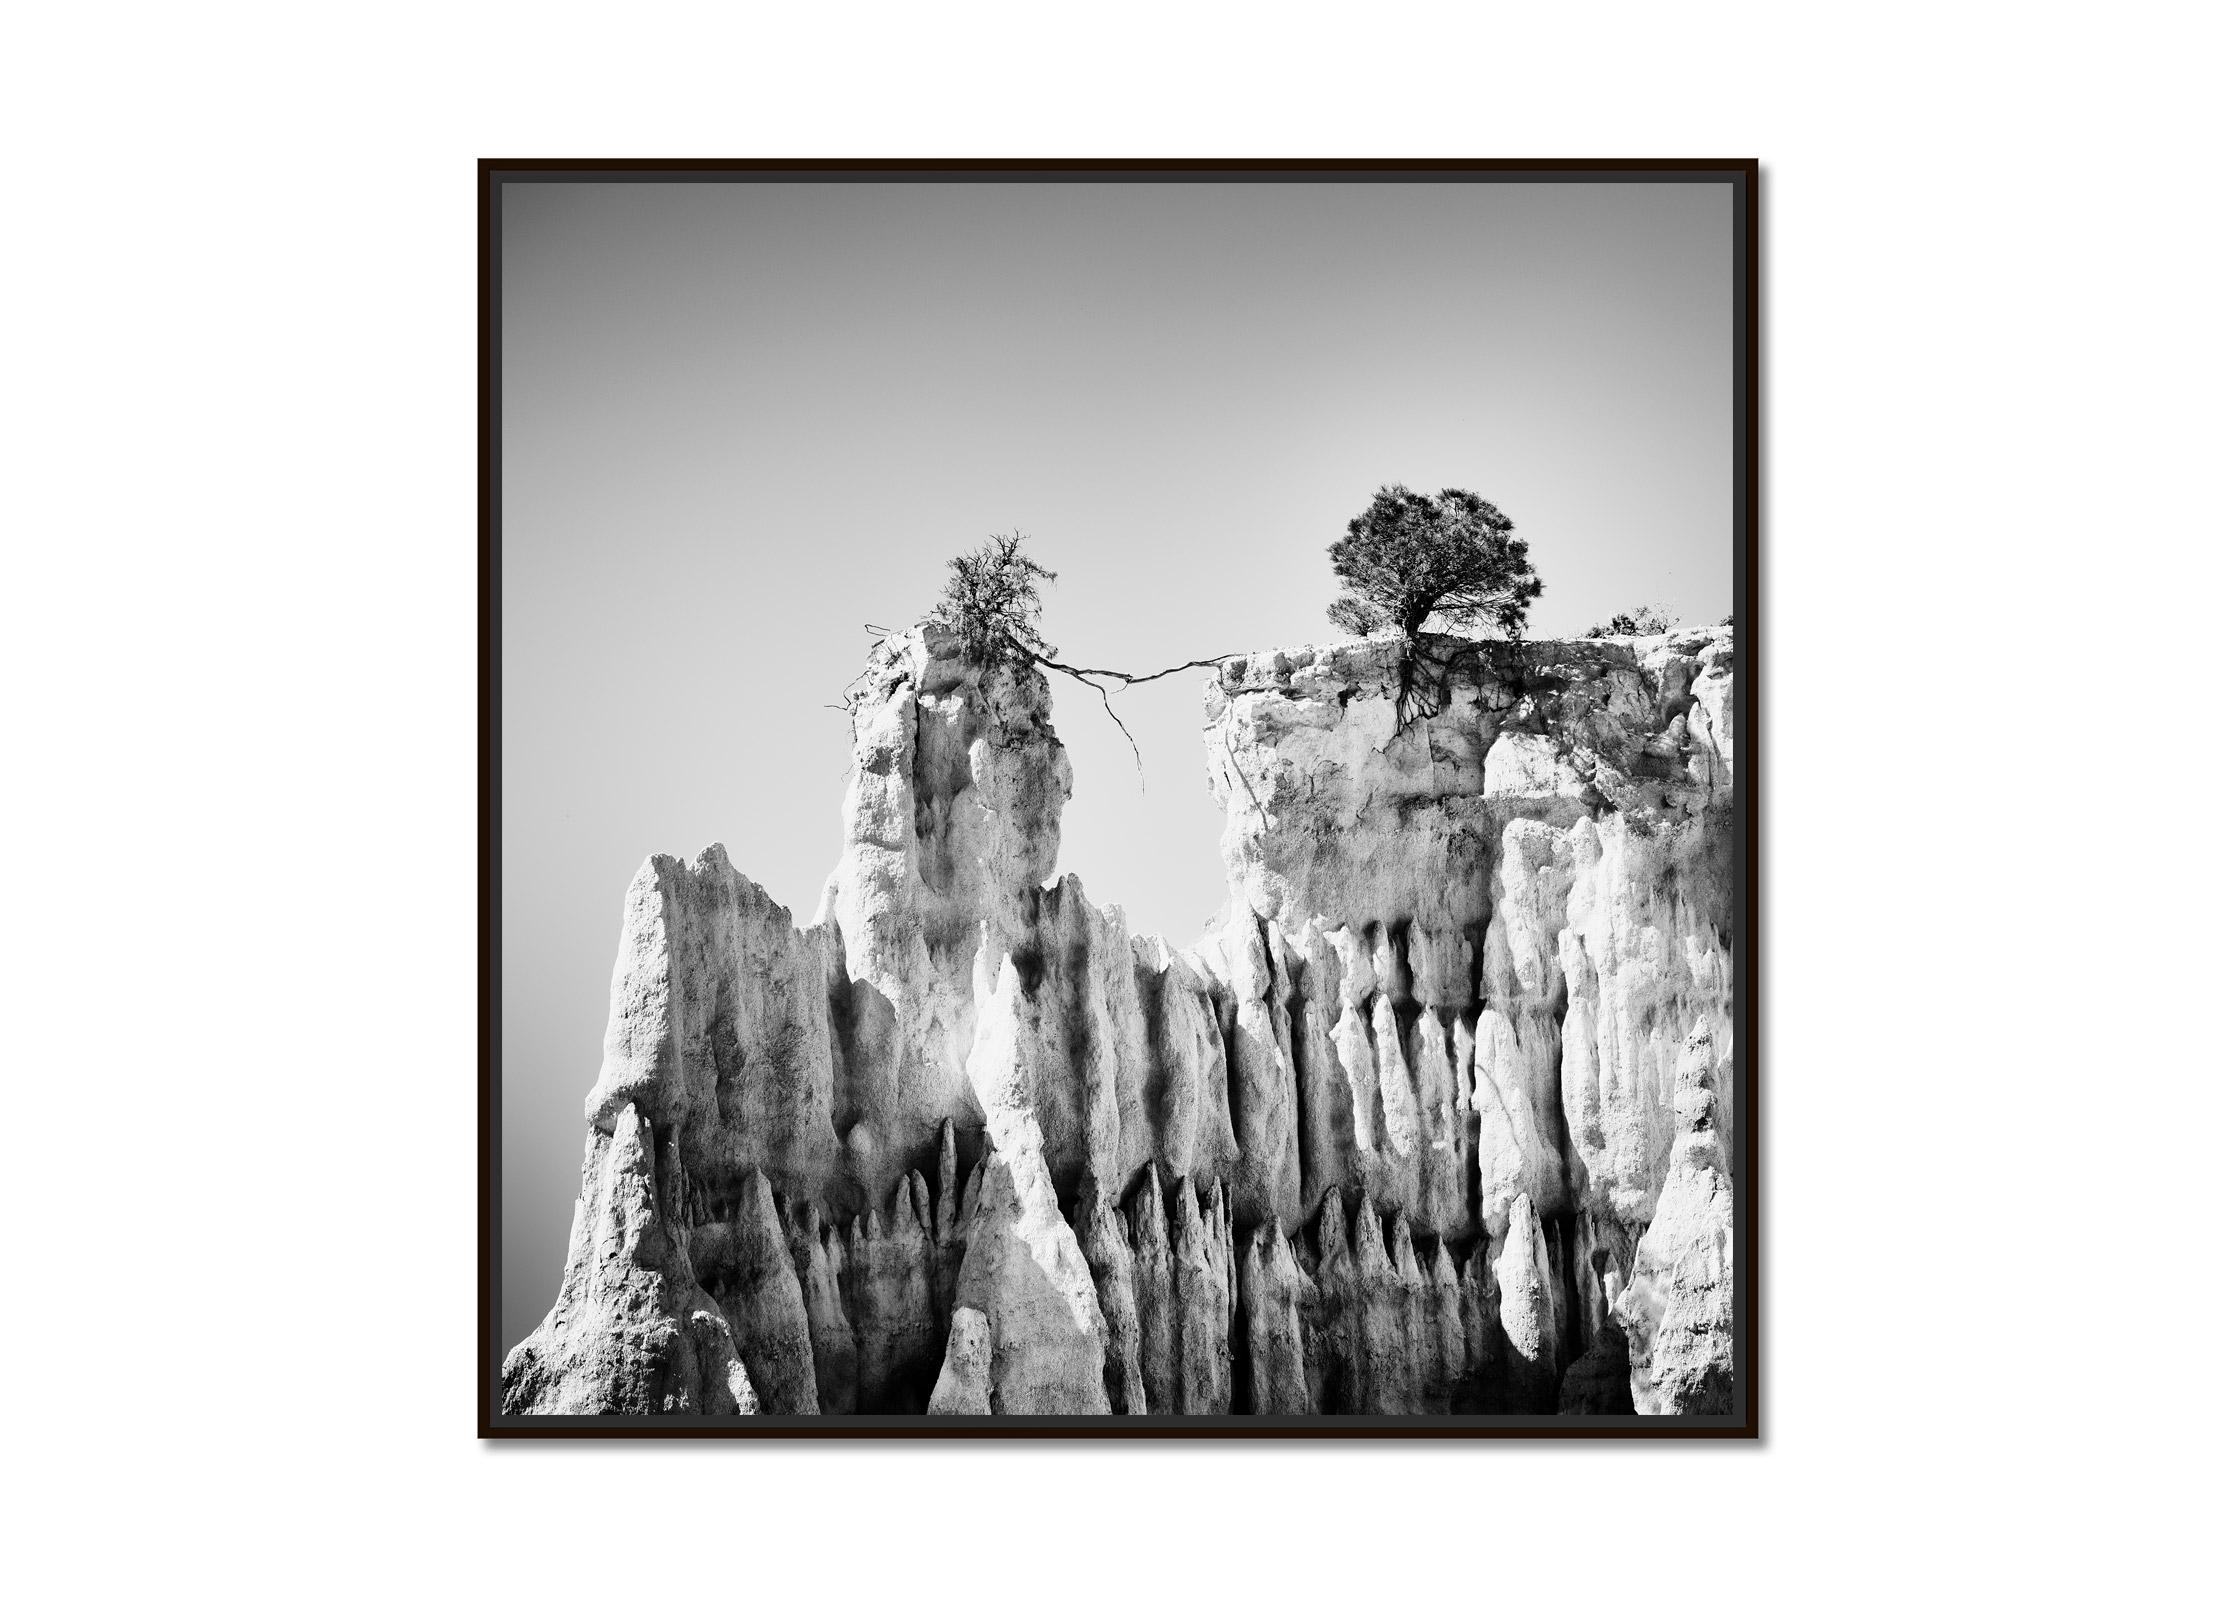 Organs of Ille-sur-Tet, Organ Pipes, black and white art photography, landscape - Photograph by Gerald Berghammer